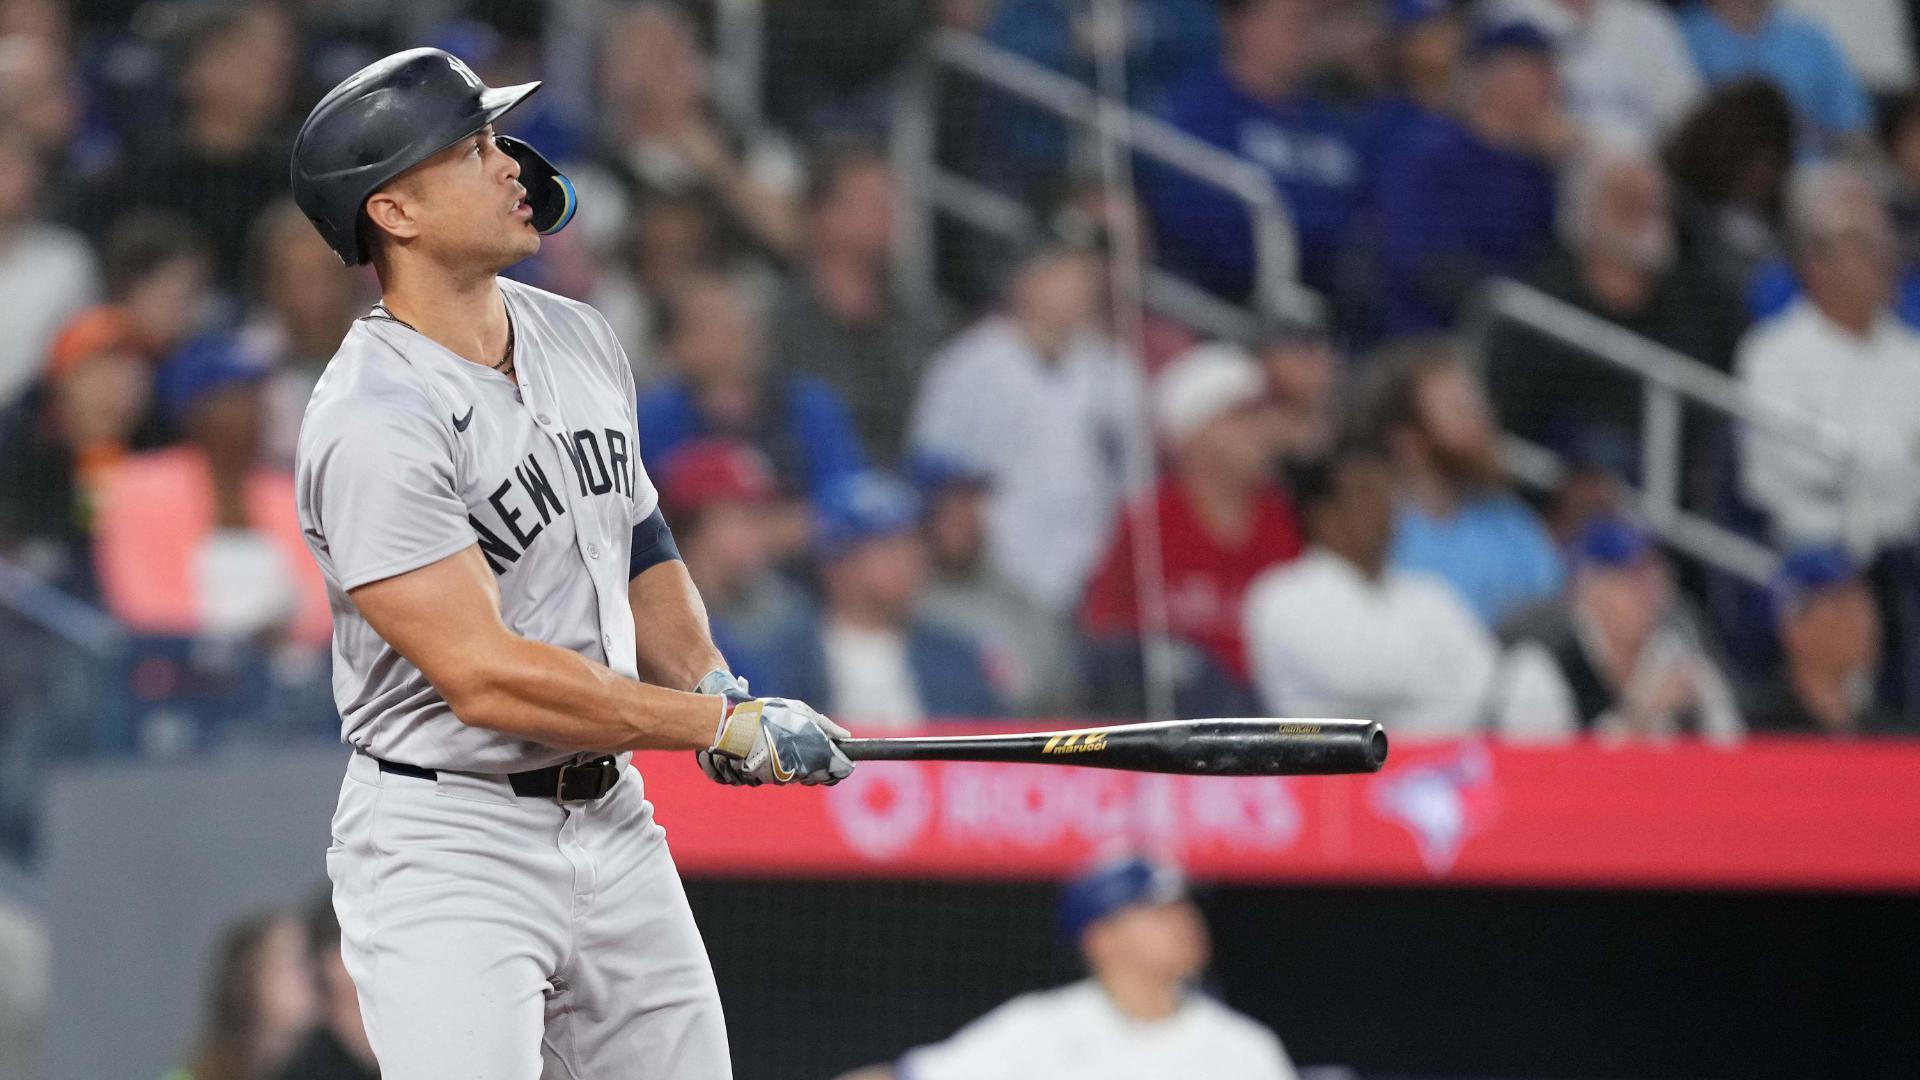 Judge hits the tiebreaking single in 9th as Yankees rally to avoid sweep with 6-4 win over Blue Jays